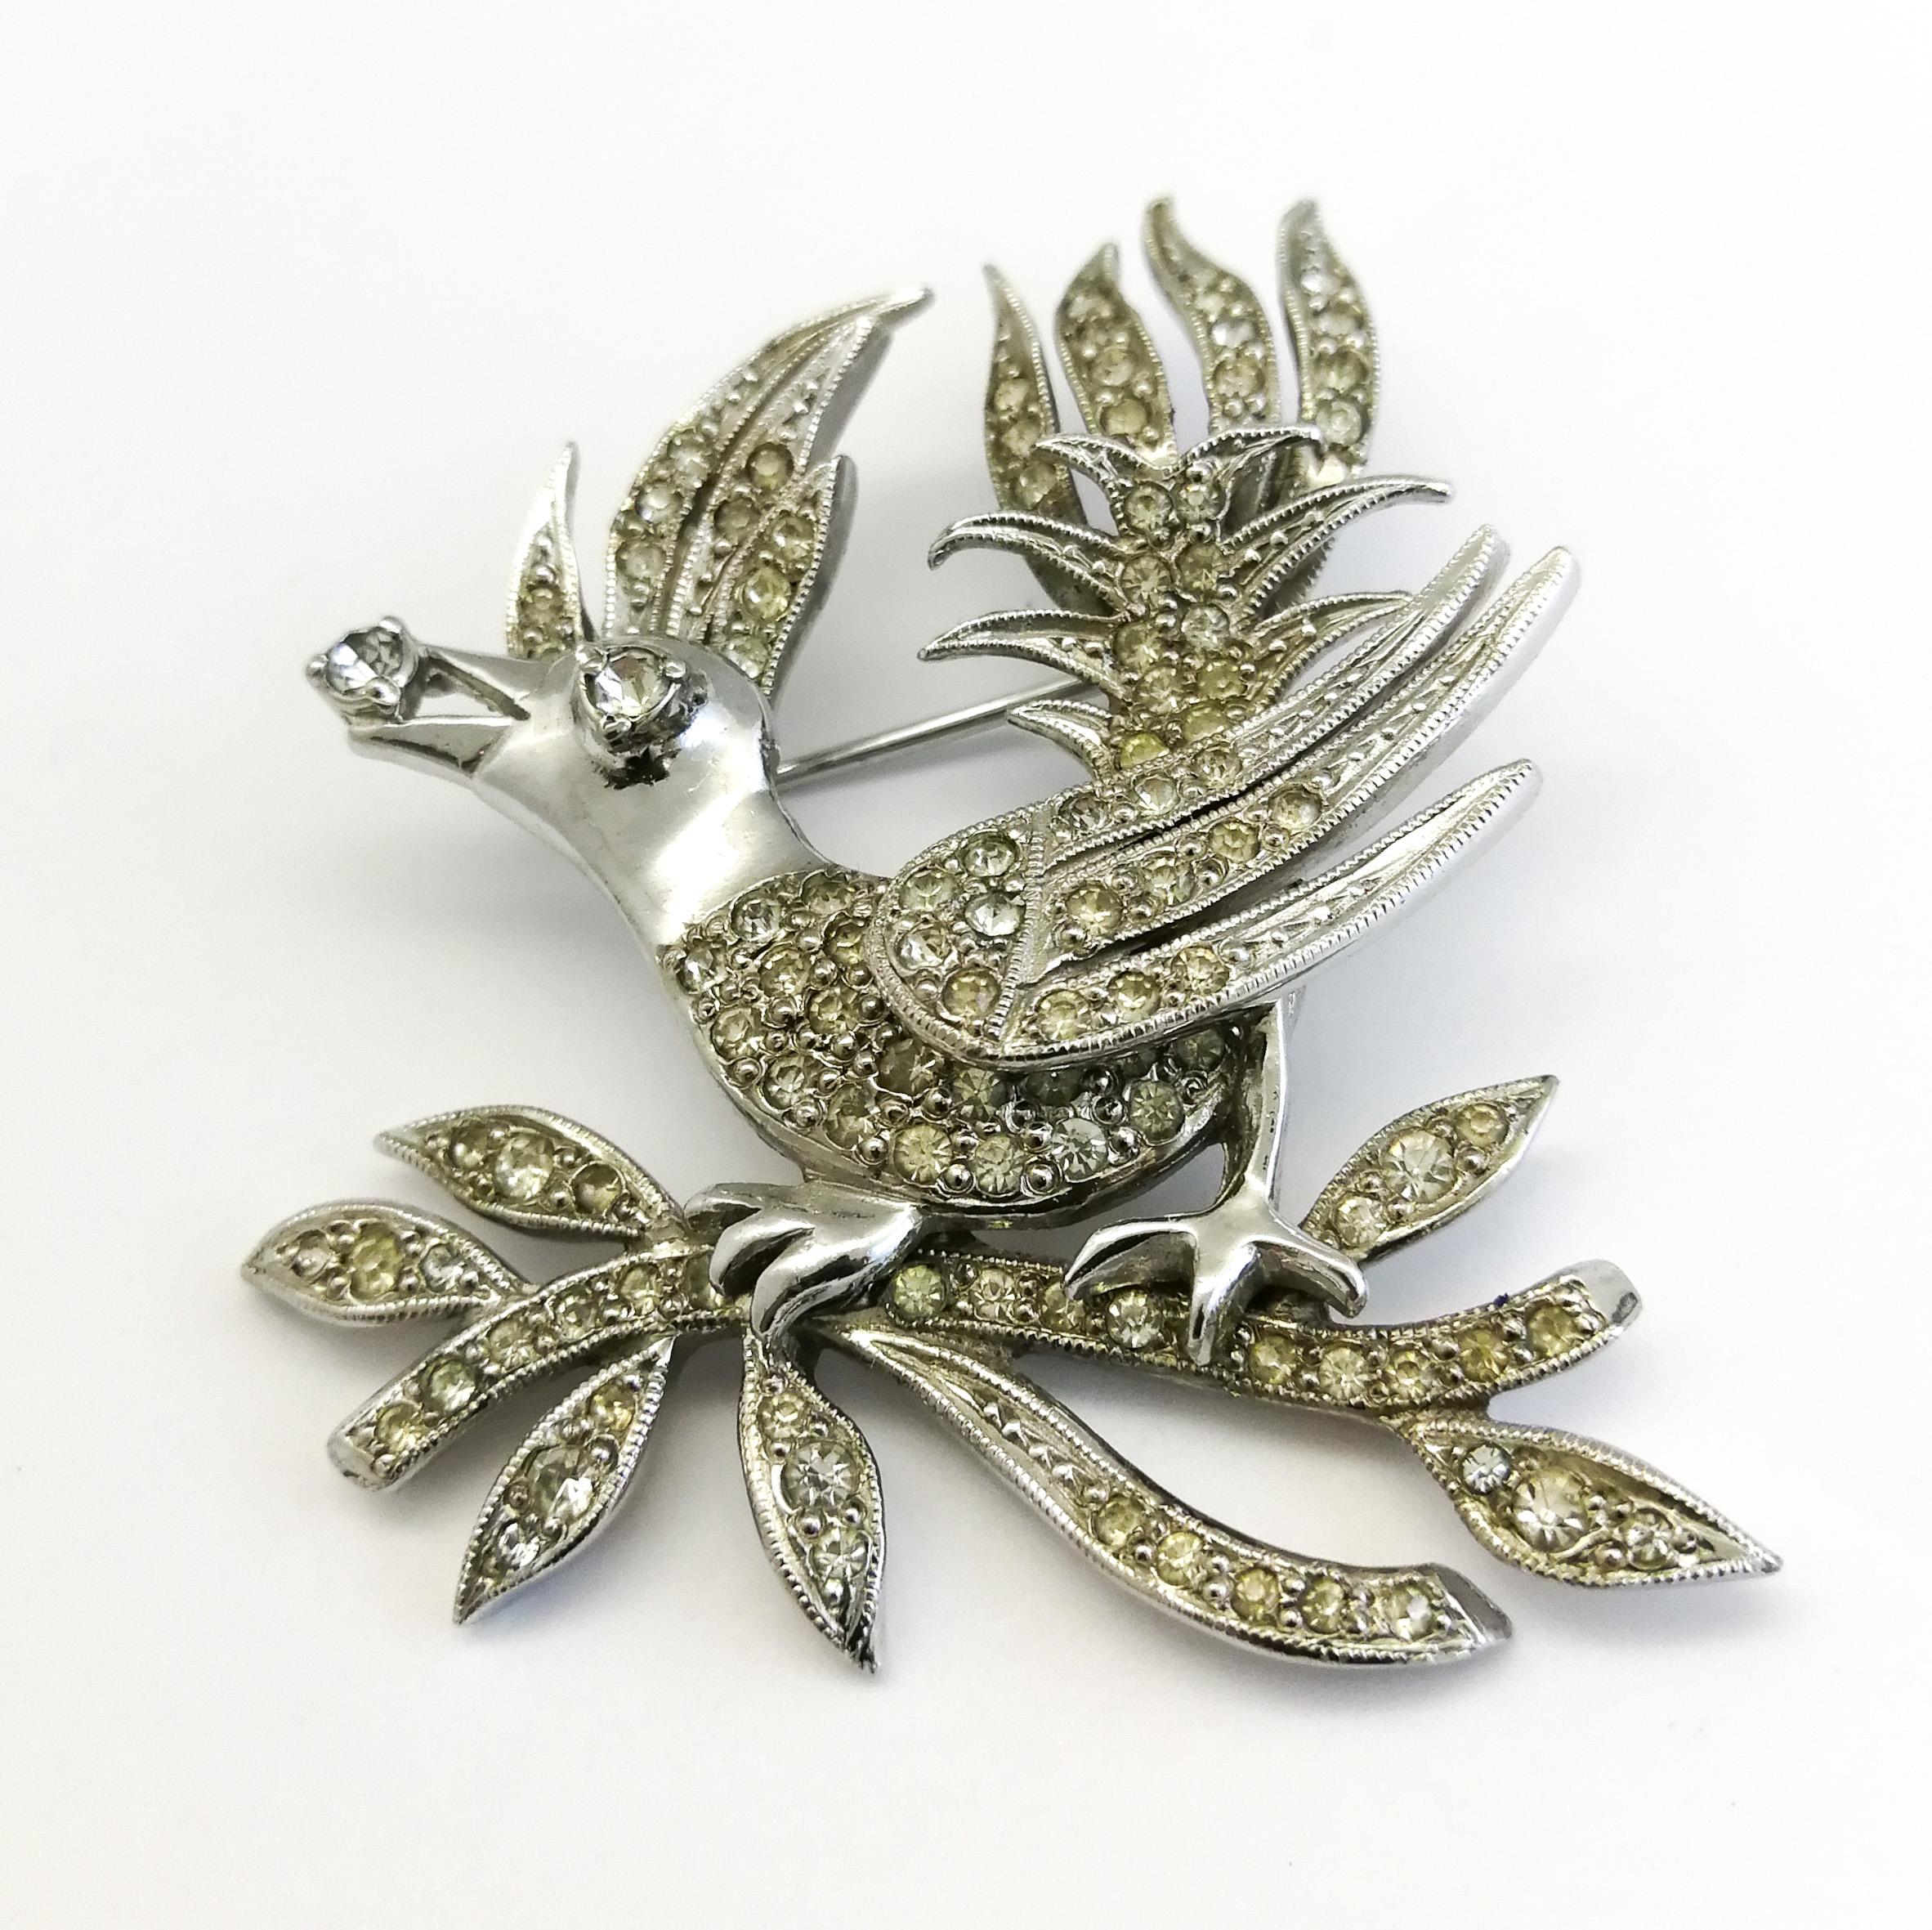 This beautiful 'gem' of a brooch, represents a bird, sitting on a branch, holding a single 'jewel' or 'diamond' in its beak. Beautifully crafted in rhodium metal and clear paste by Mitchel Maer for Christian Dior in the early 1950s, it is a part of